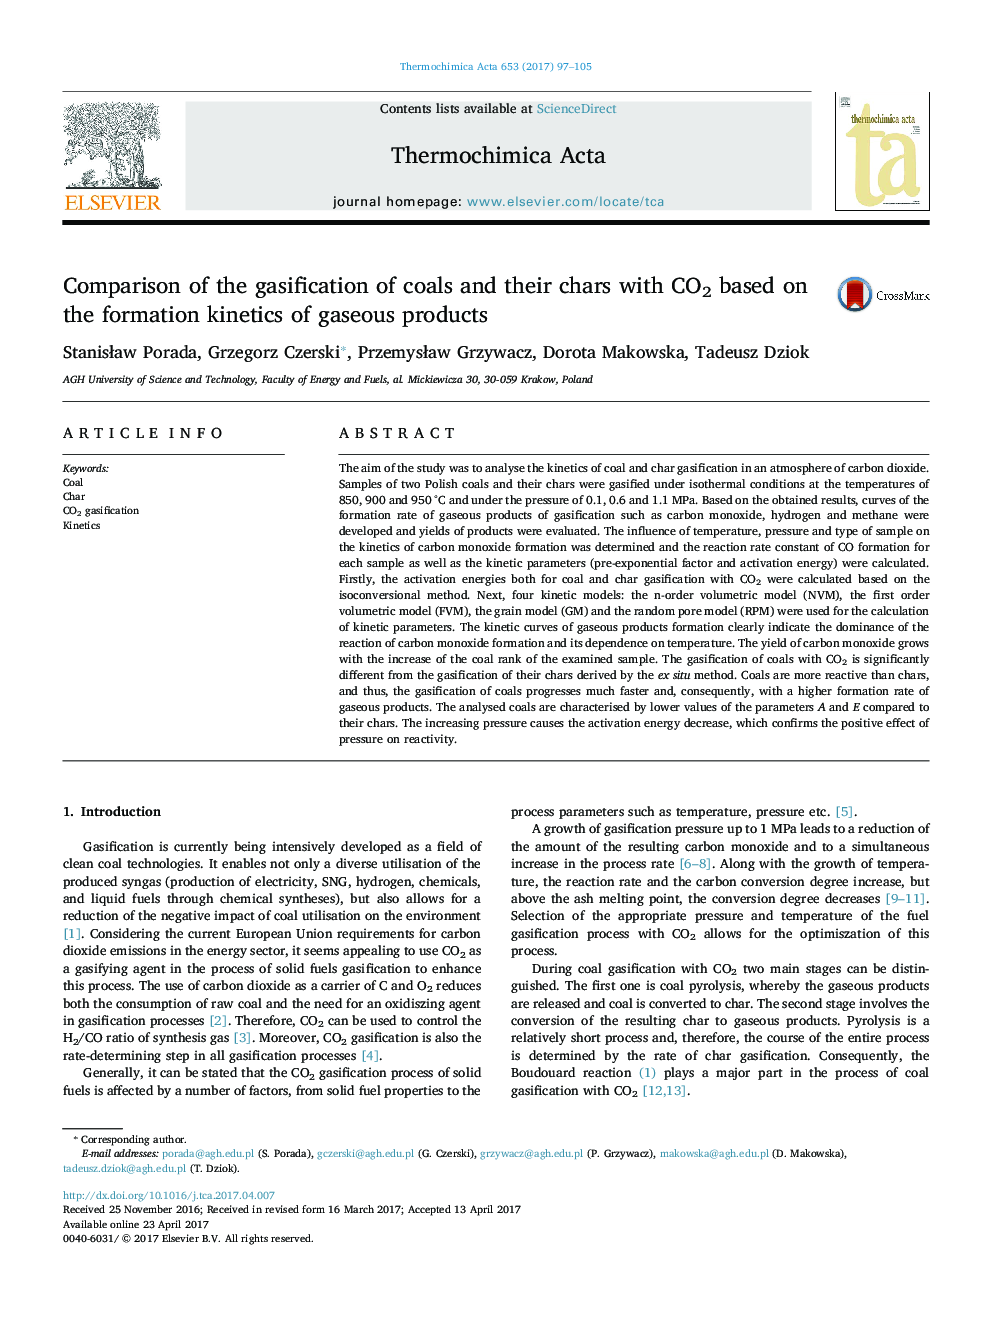 Comparison of the gasification of coals and their chars with CO2 based on the formation kinetics of gaseous products